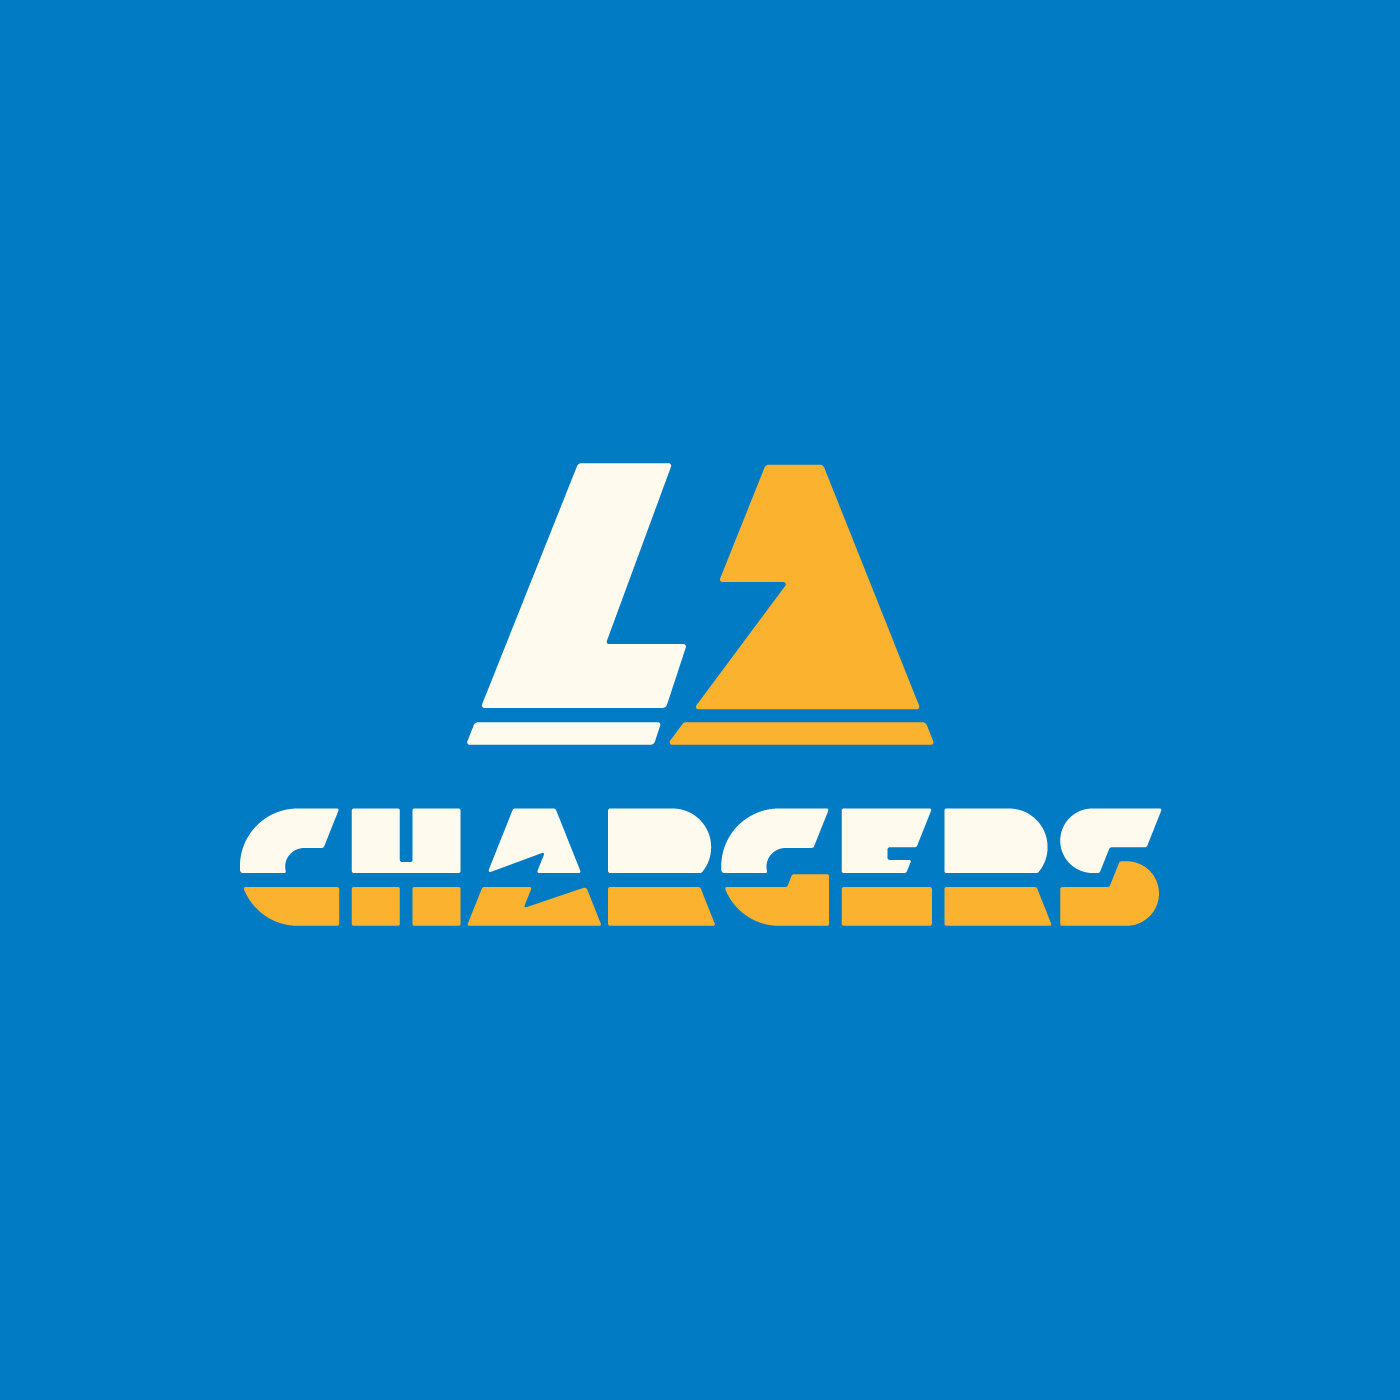 Los Angeles Chargers Shirt, Custom prints store